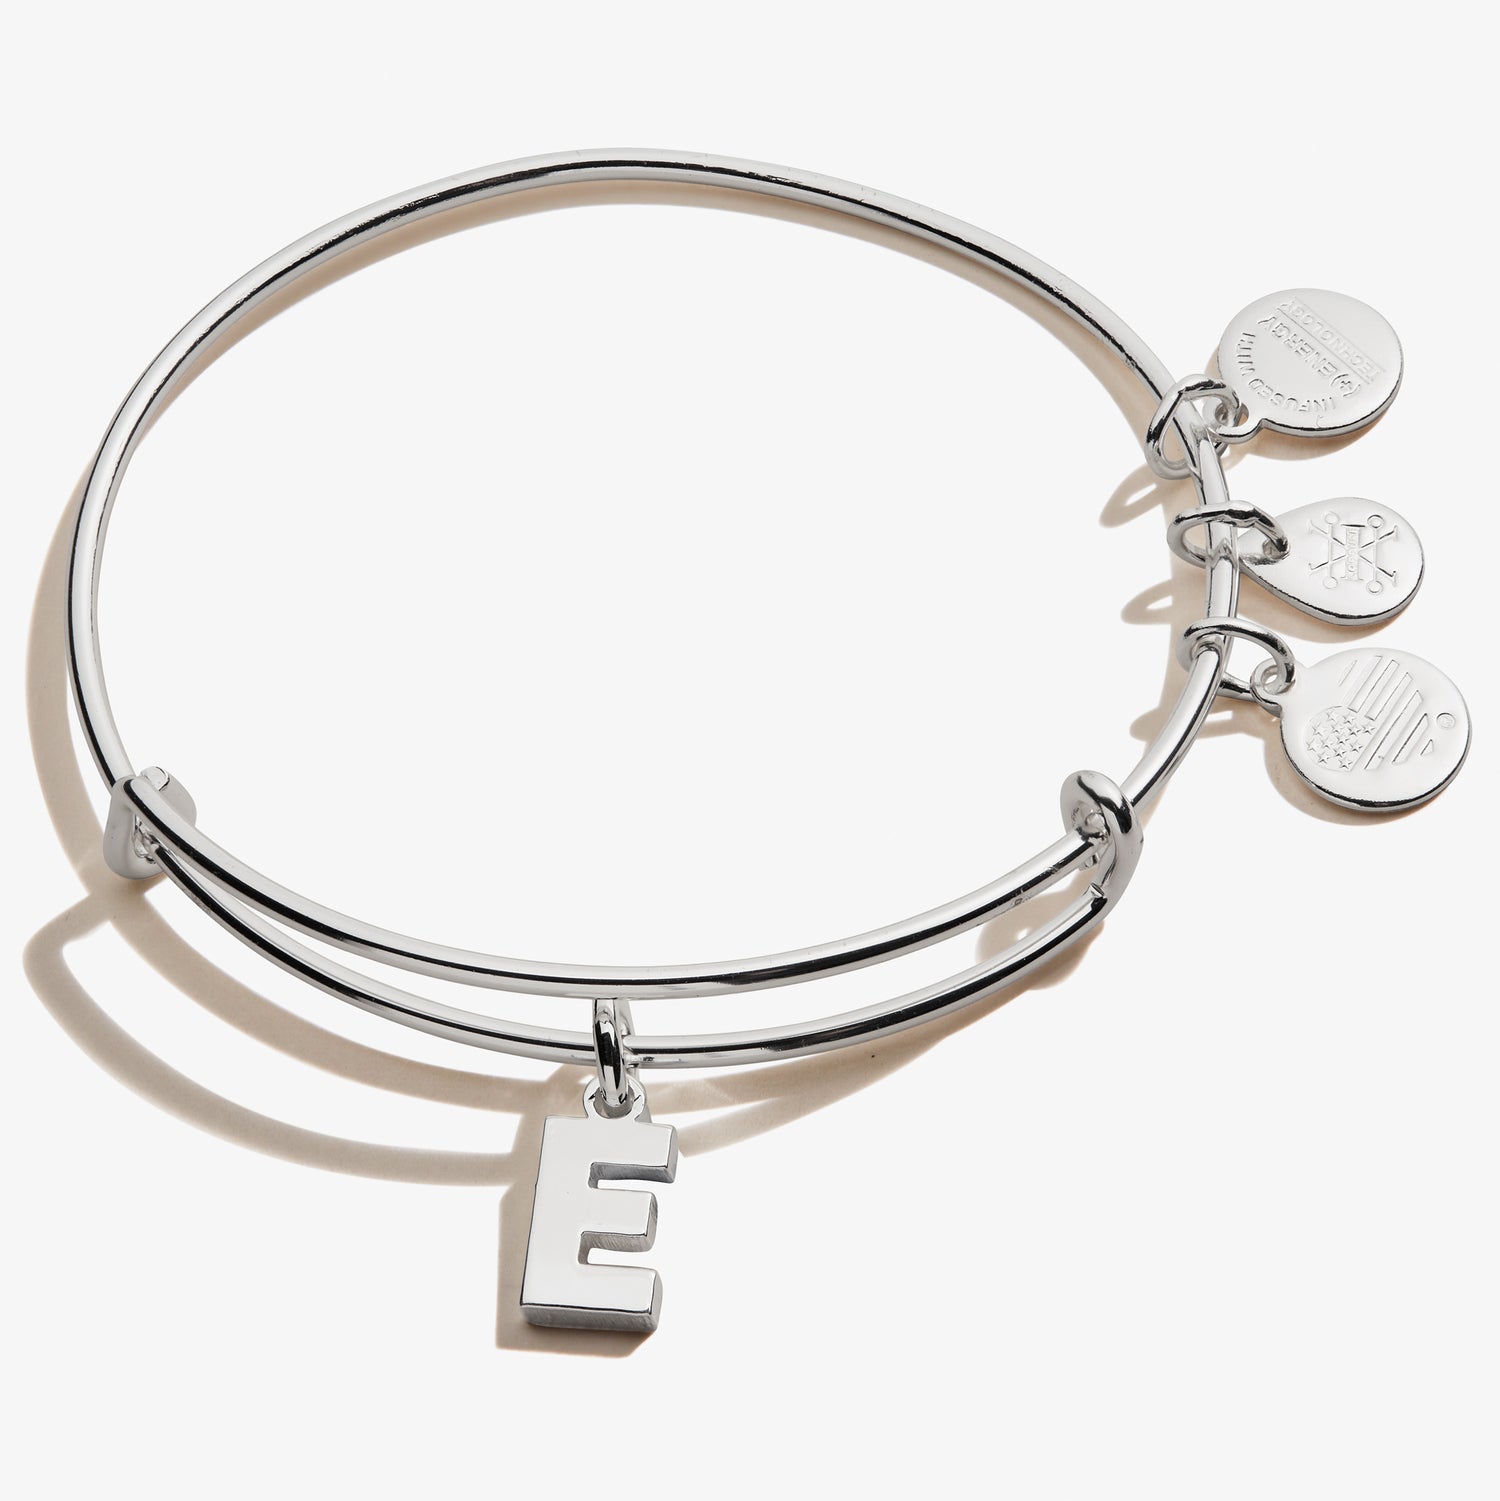 Alex and Ani Initial M Charm Bangle Bracelet in Shiny Silver